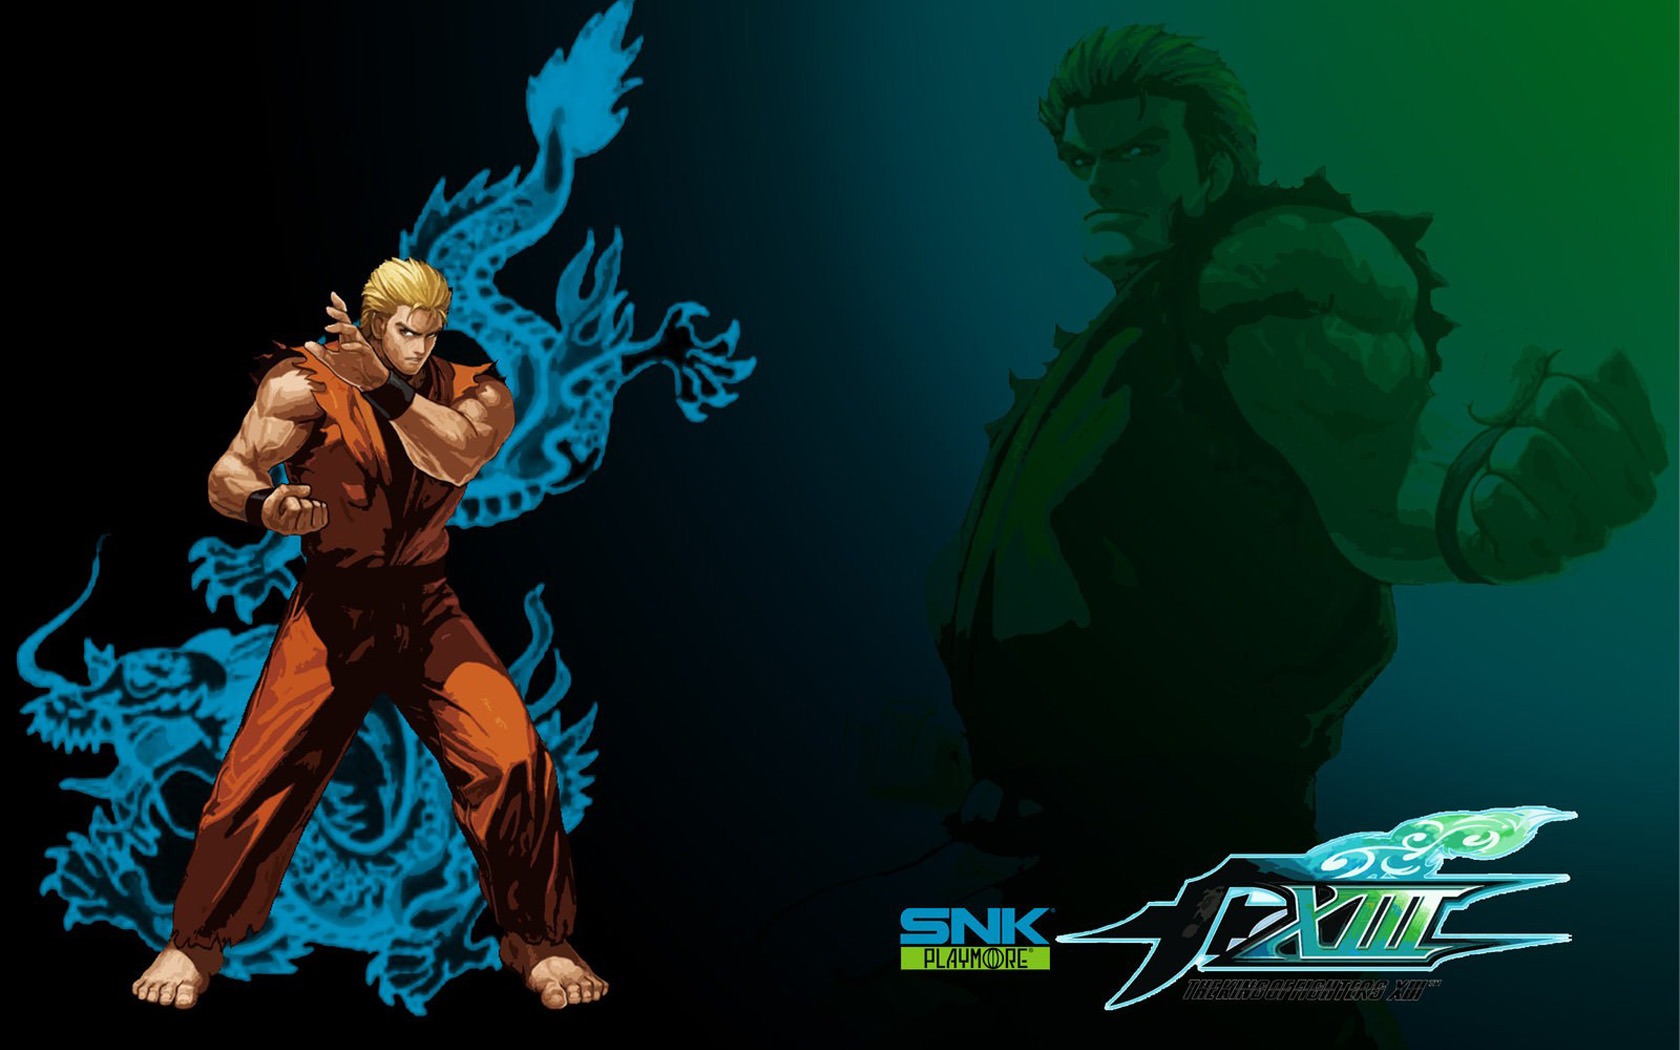 The King of Fighters XIII wallpapers #2 - 1680x1050